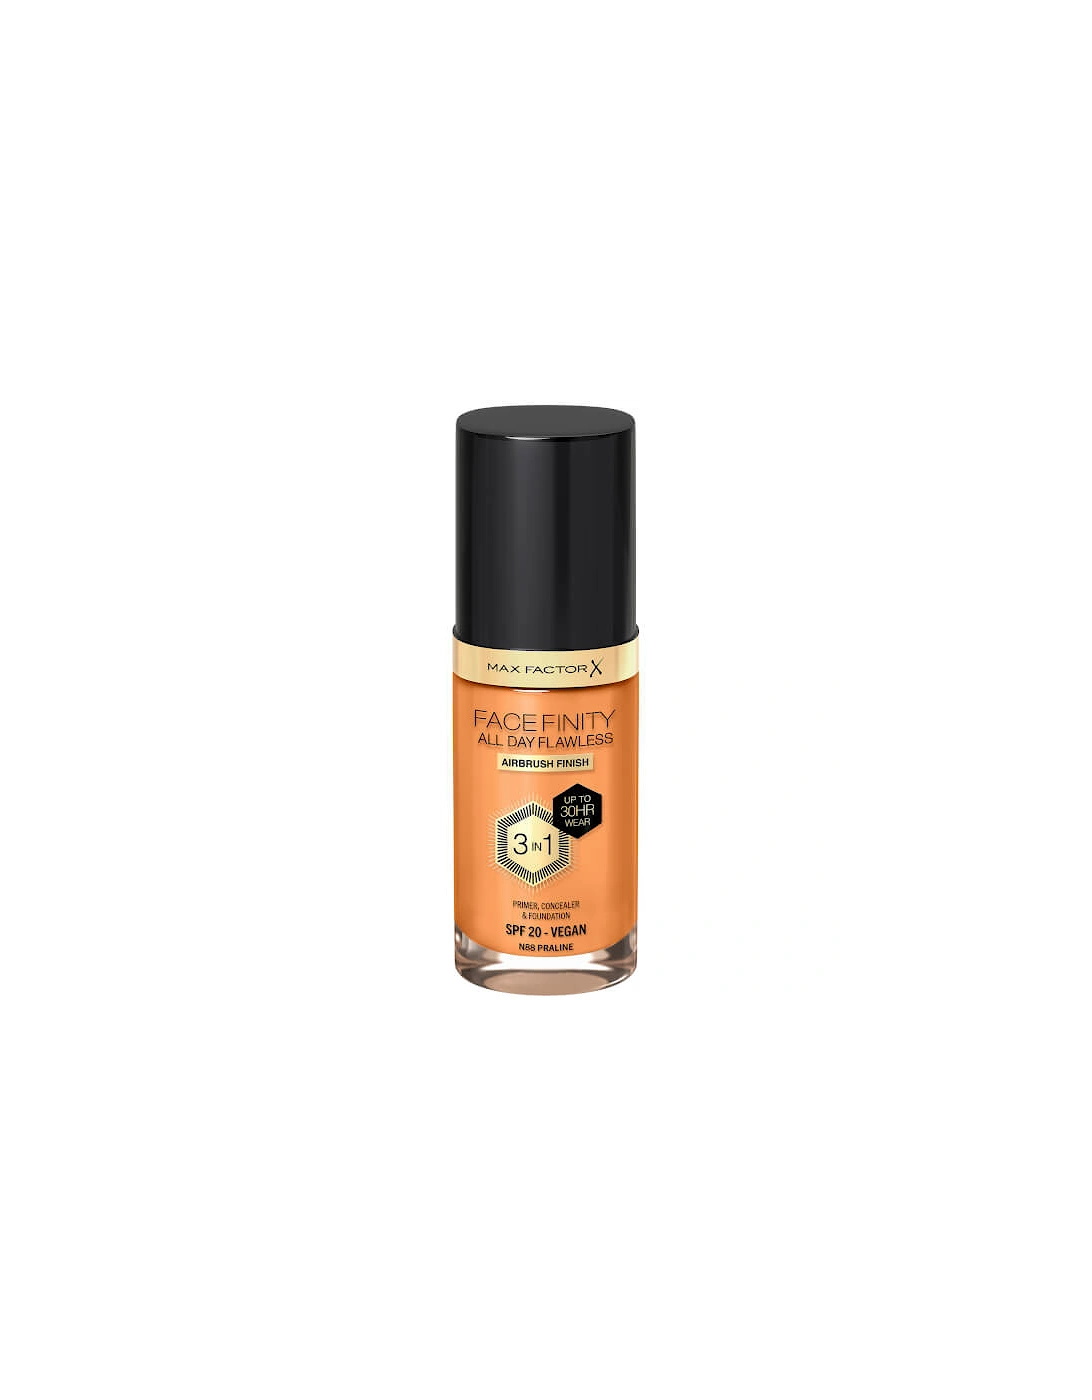 Facefinity All Day Flawless 3 in 1 Vegan Foundation - N88 Praline, 2 of 1